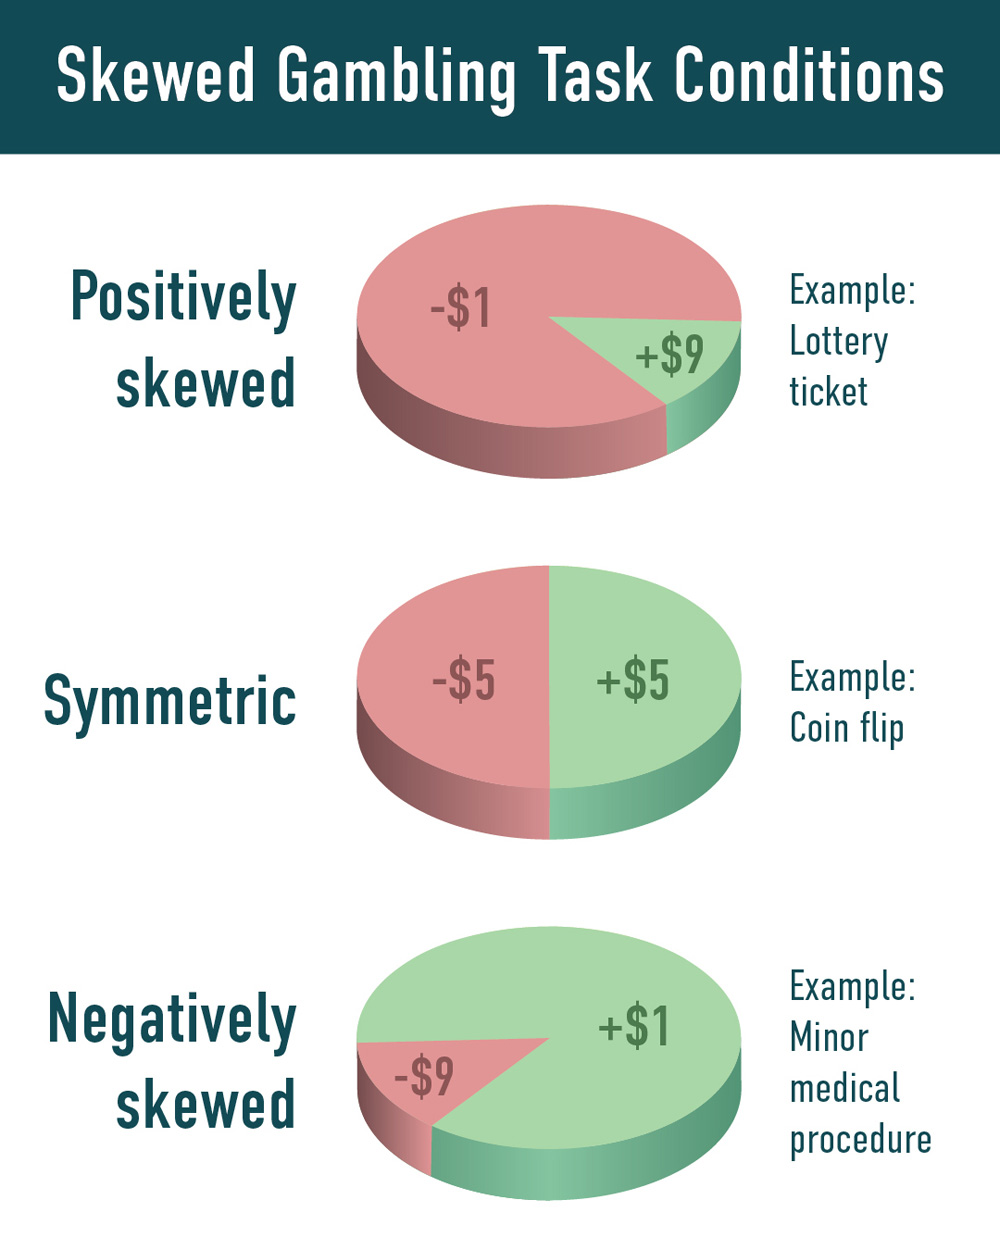 Skewed Gambling Task Conditions. Positively skewed, with the example of a lottery ticket, is negative one dollar to positive nine dollars. Symmetric, with example of coin flip, shows negative five dollars and positive five dollars. Negatively skewed, with example of minor medical procedure, shows negative nine dollars and positive one dollar.